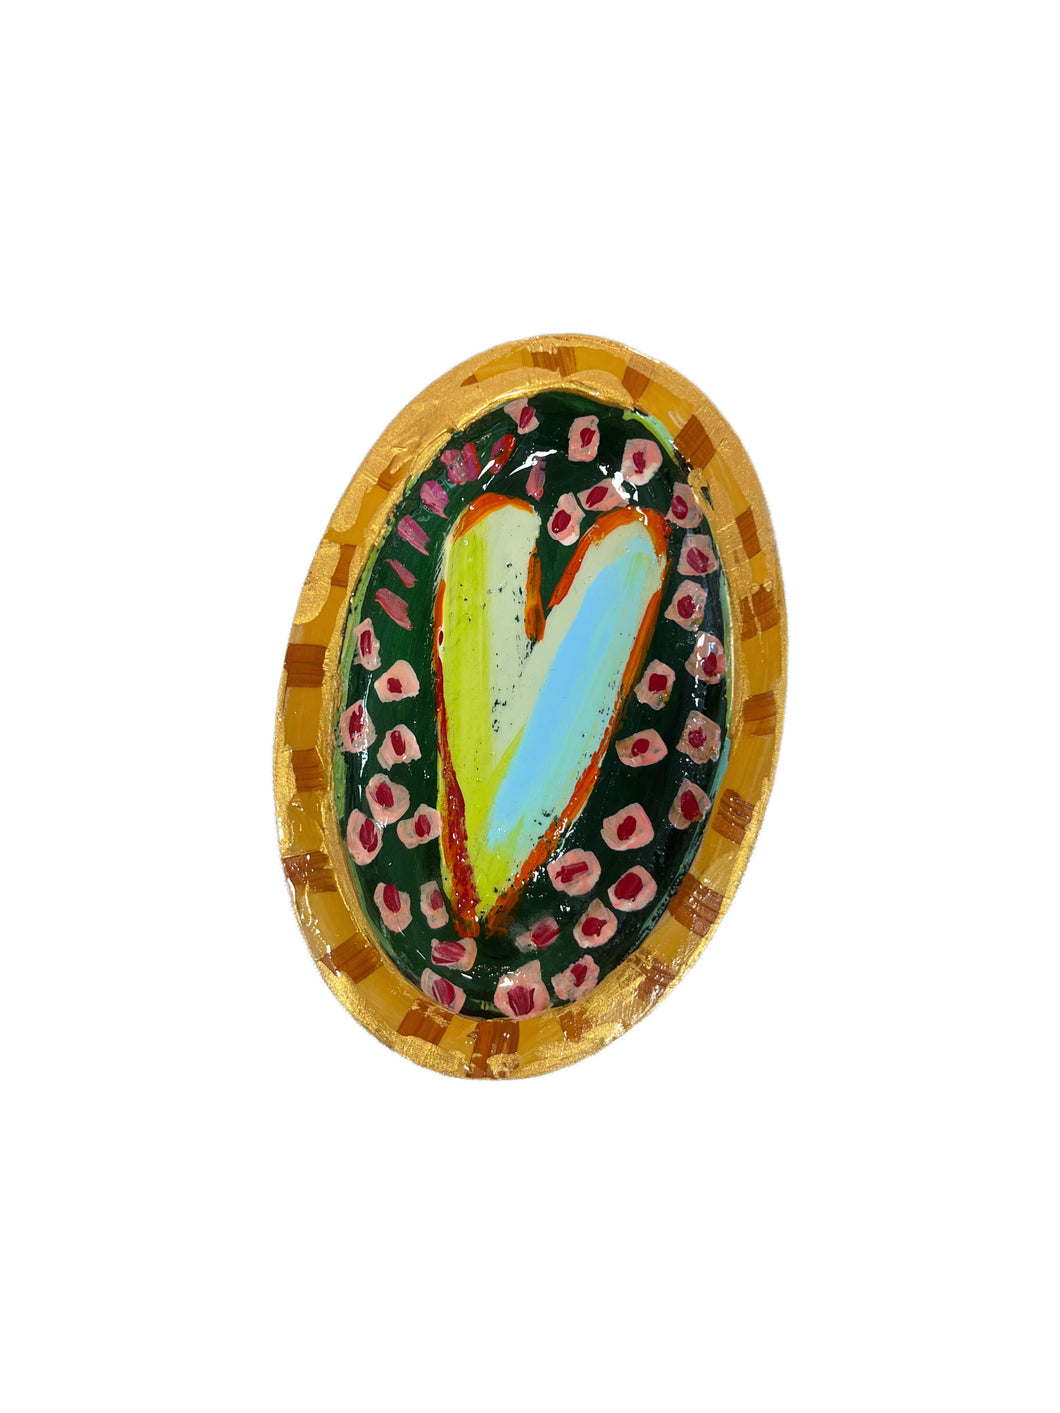 Hand-painted Oval Heart Dish, Blue/Green